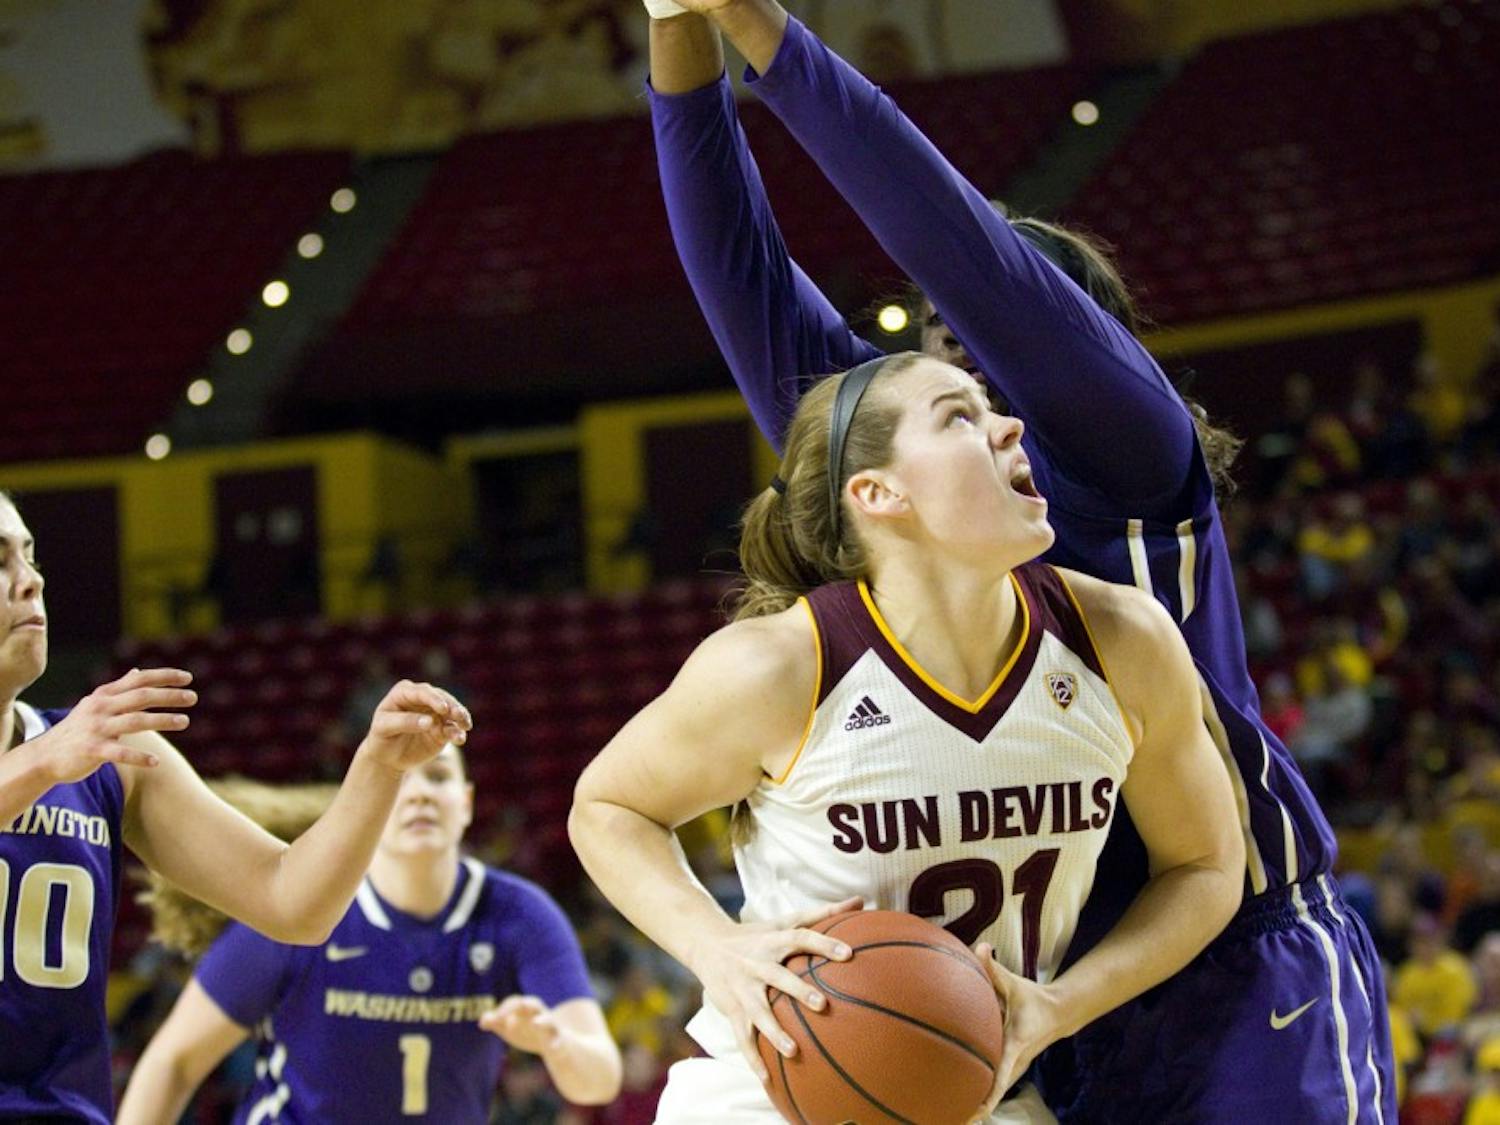 ASU senior forward Sophie Brunner (21) goes up for a tough basket during a women's basketball game versus no. 8 Washington in Wells Fargo Arena in Tempe, Arizona on Sunday, Jan. 15, 2017. ASU lost 65-54, putting them at 13-4 on the season.